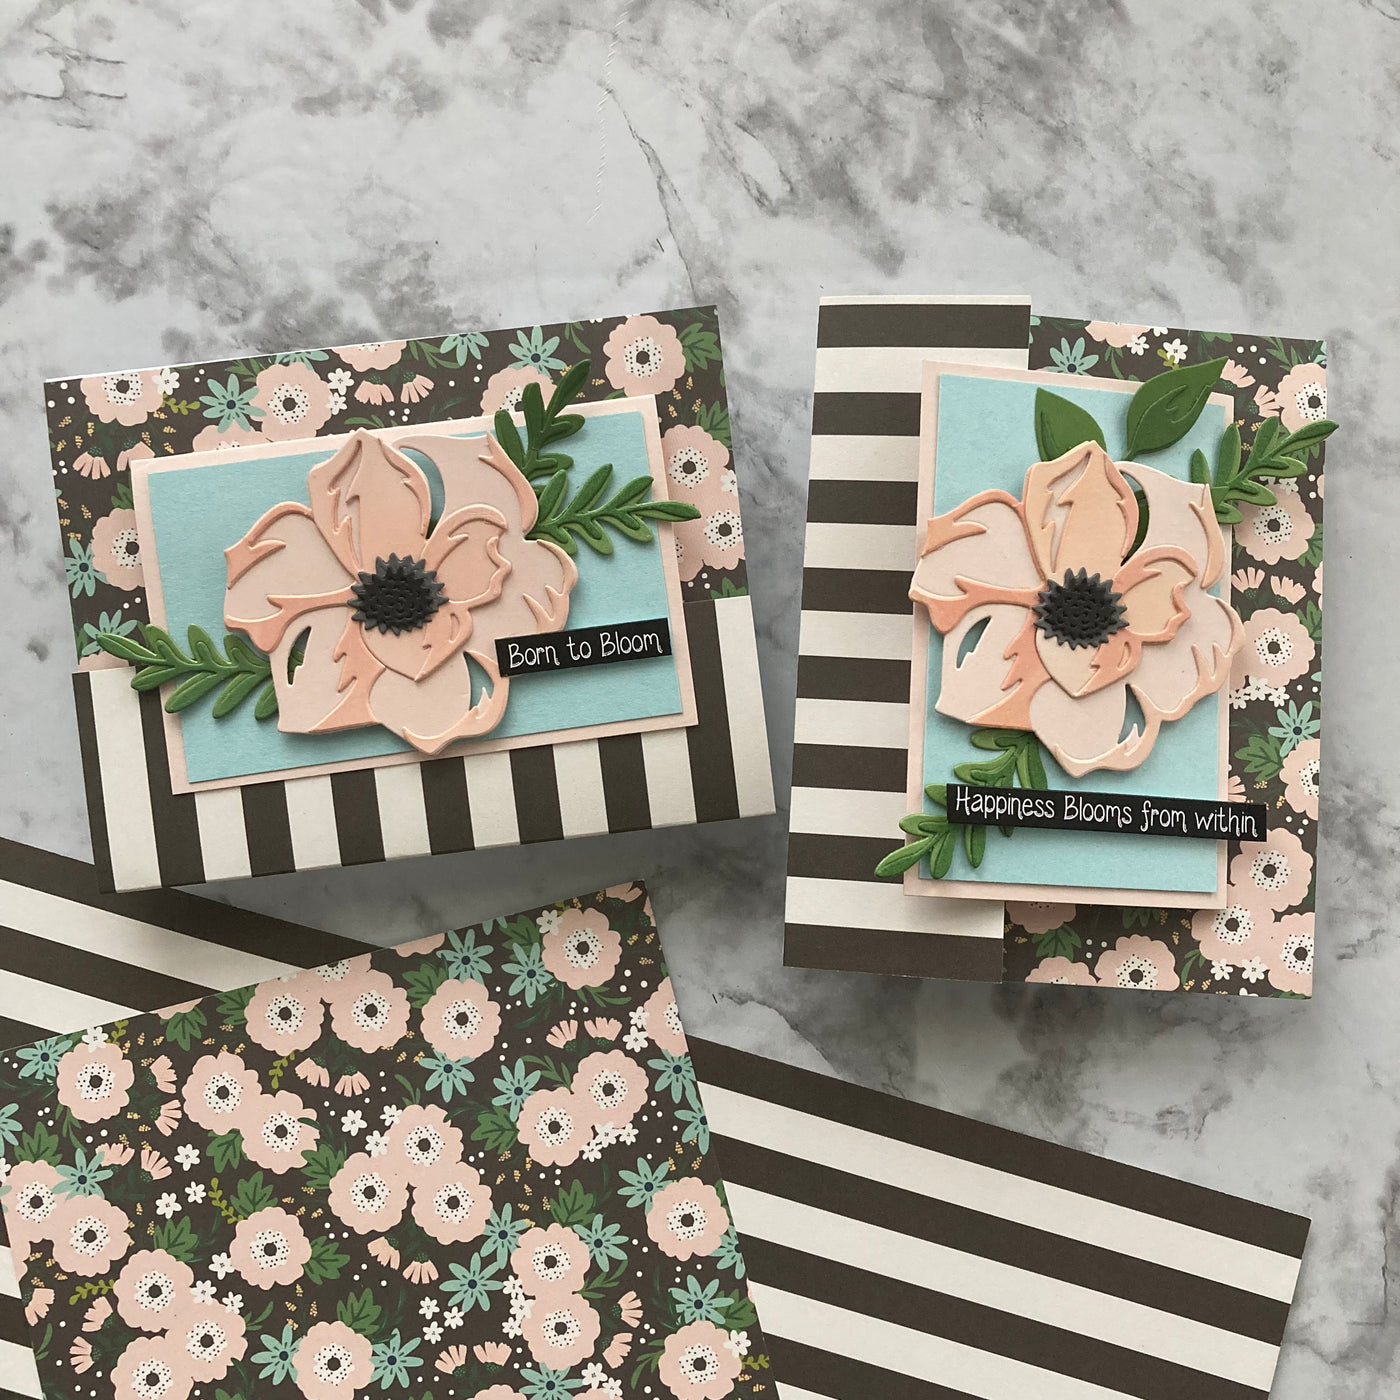 Fun Fold Cards featuring American Crafts Bloom Patterned Paper